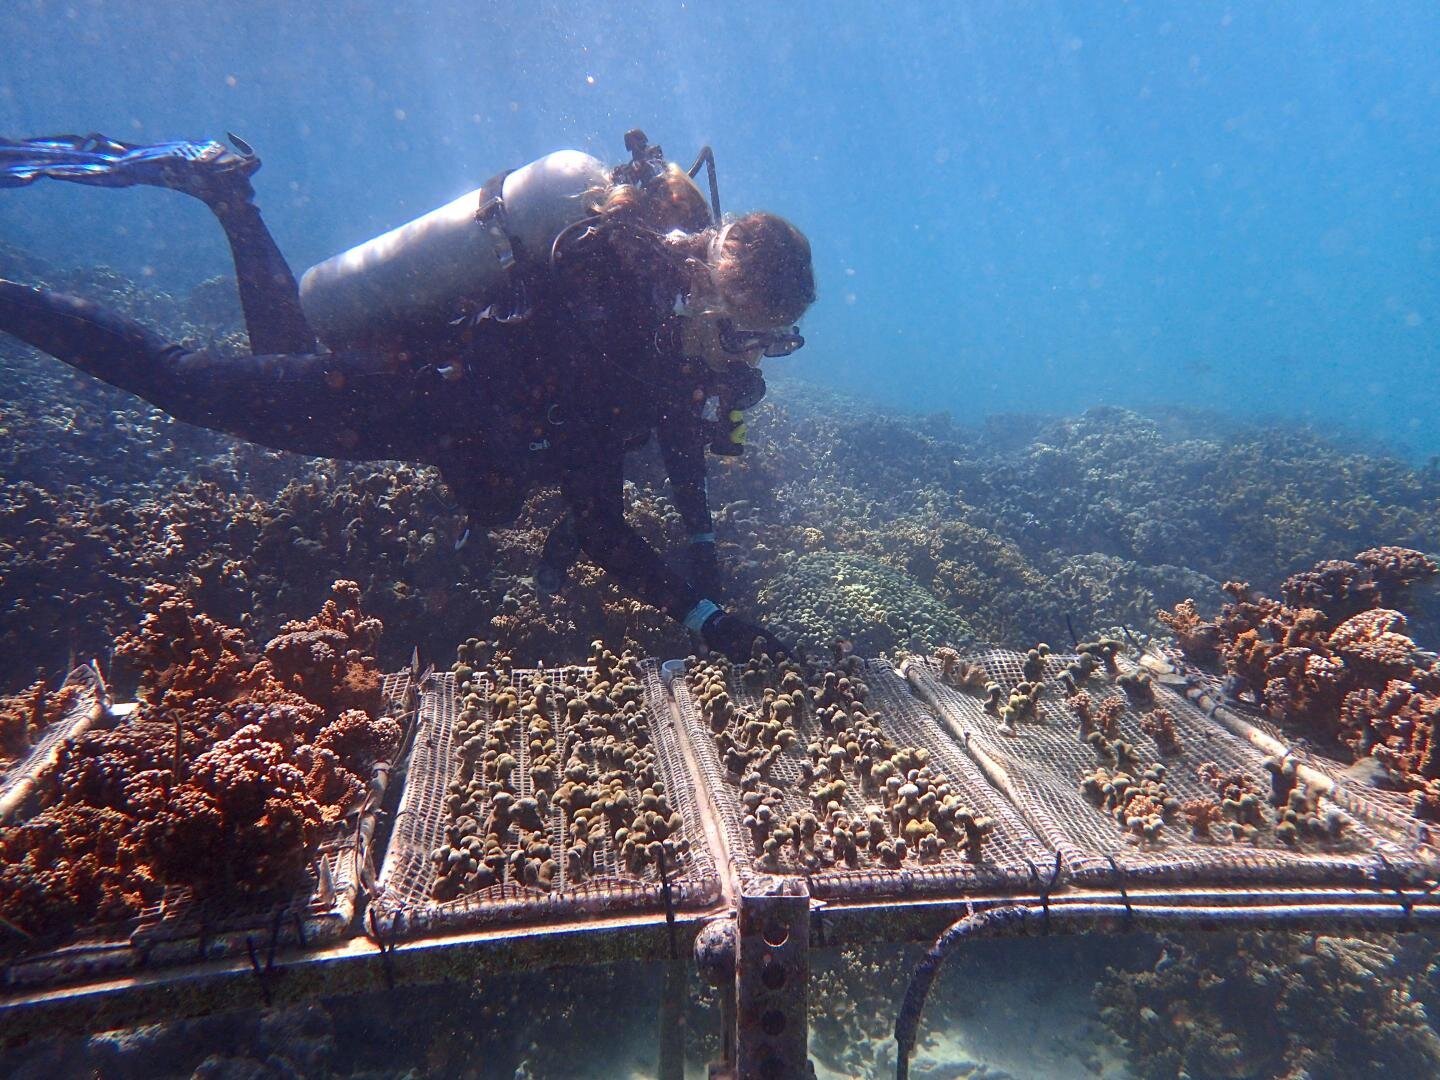 Climate change-resistant corals could provide lifeline to battered reefs